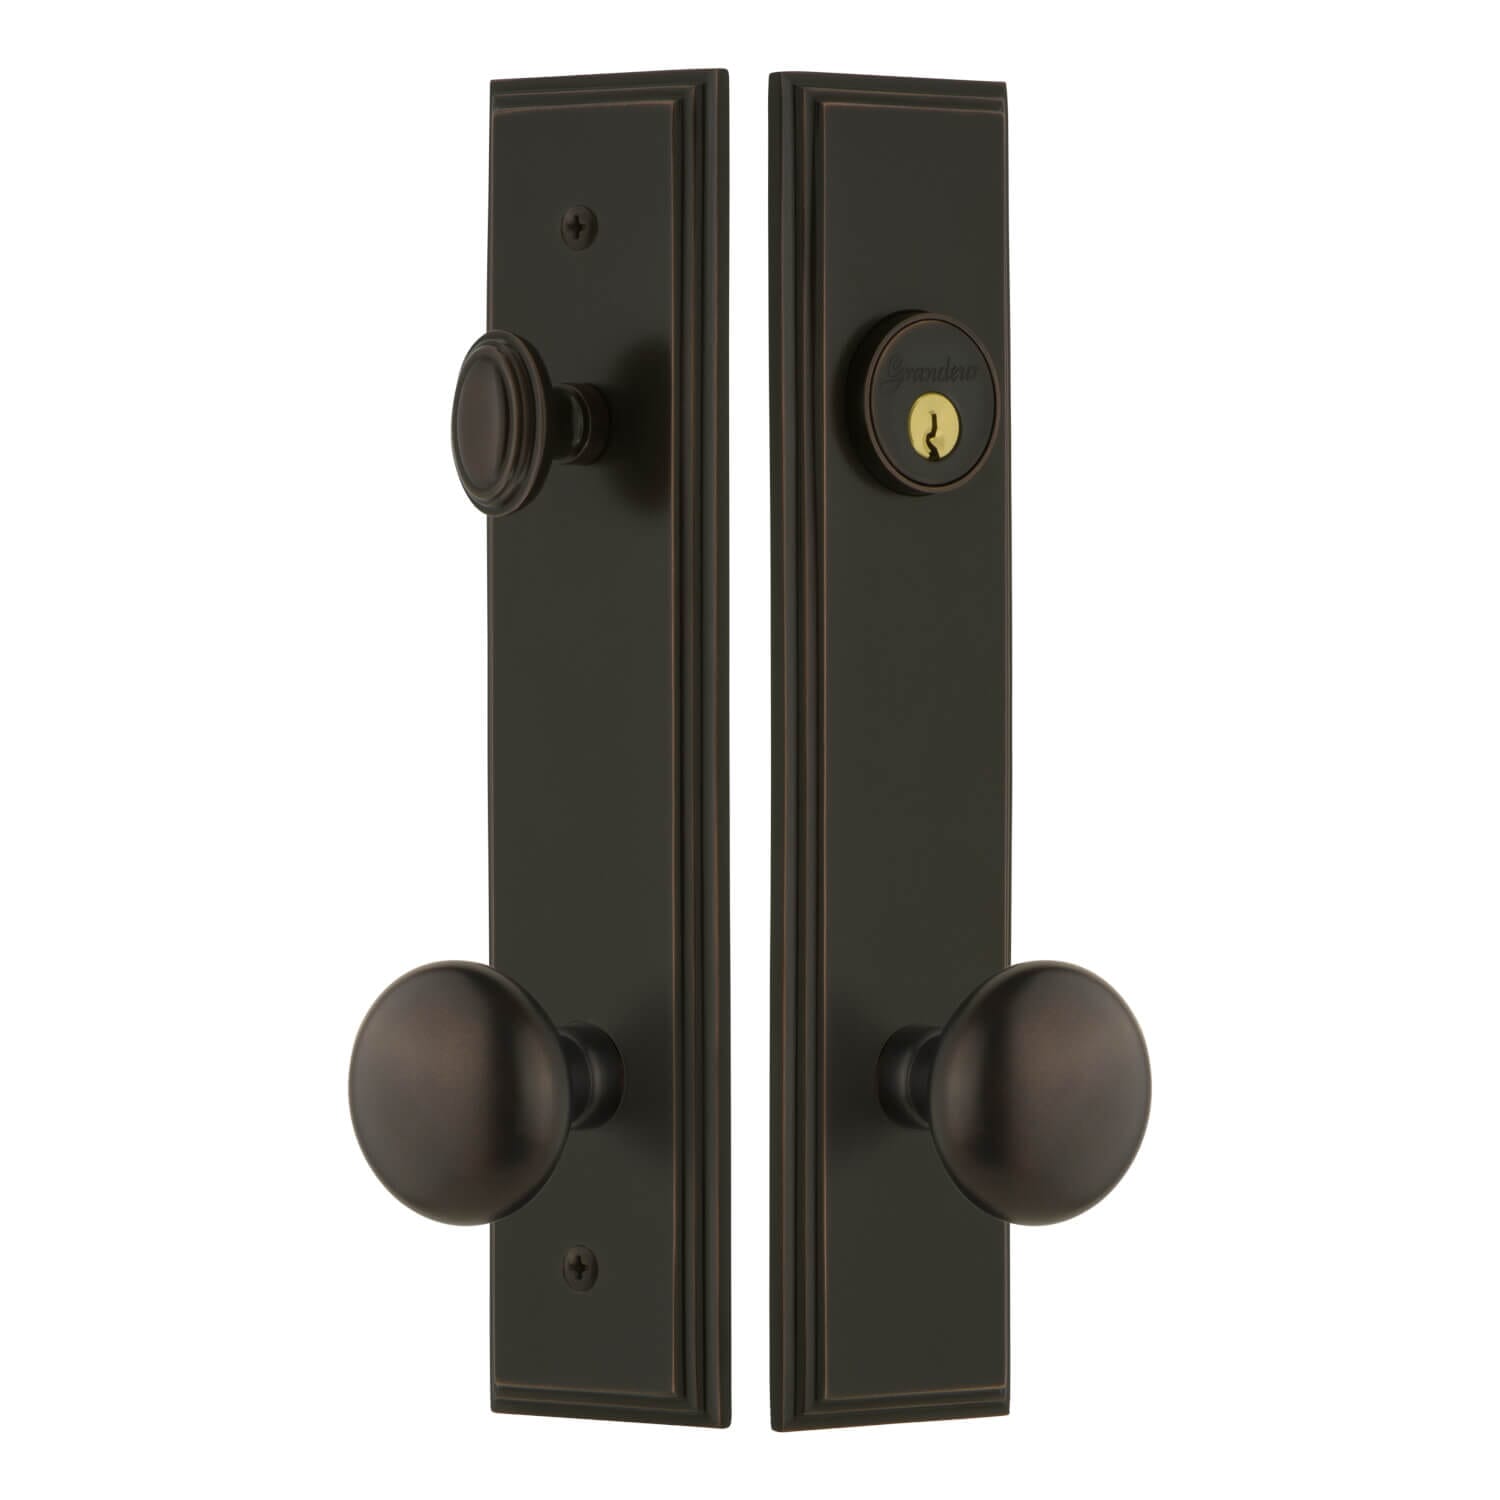 Carré Tall Plate Entry Set with Fifth Avenue Knob in Lifetime